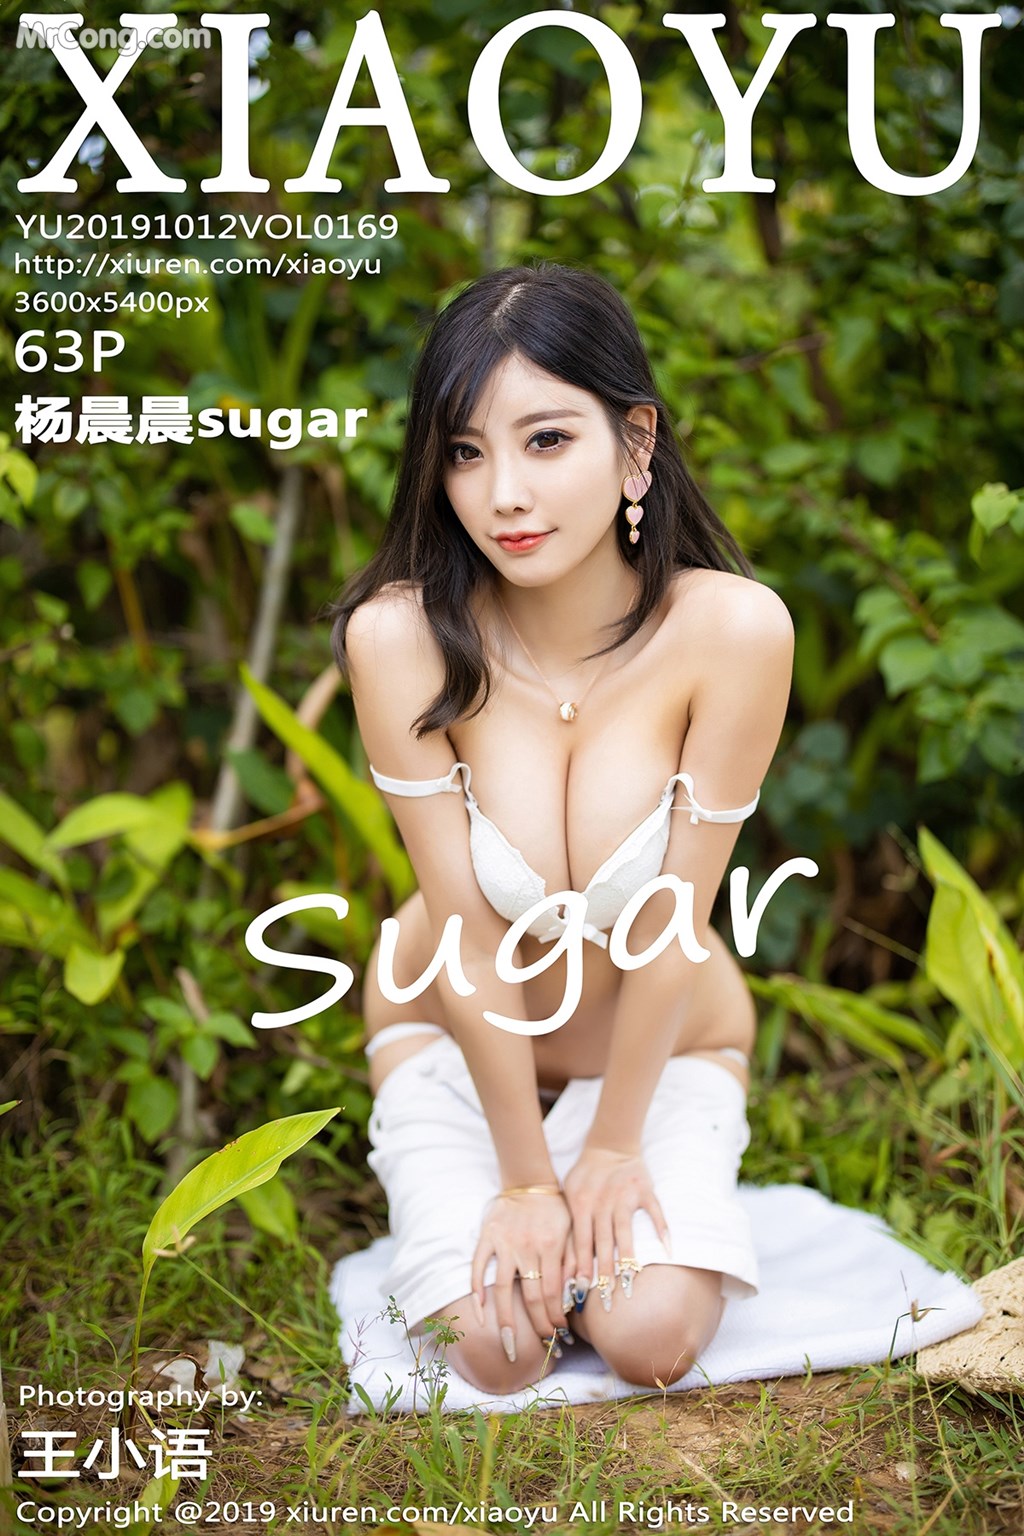 XiaoYu Vol.169: Yang Chen Chen (杨晨晨 sugar) (64 pictures)